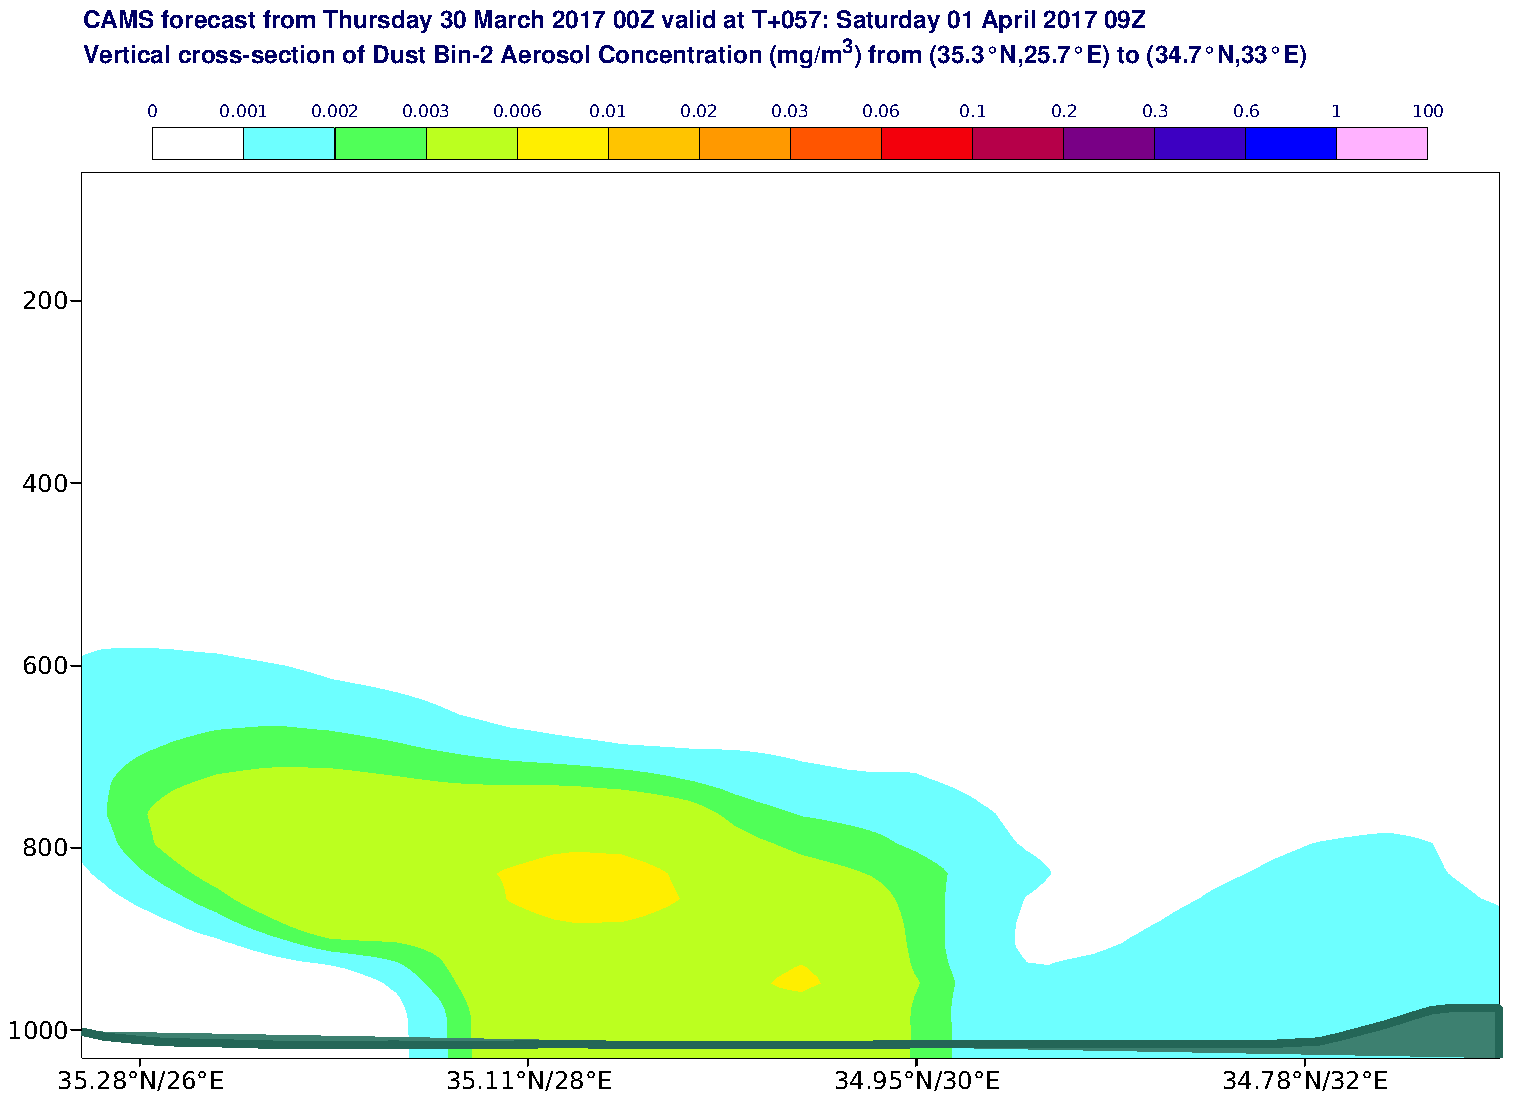 Vertical cross-section of Dust Bin-2 Aerosol Concentration (mg/m3) valid at T57 - 2017-04-01 09:00